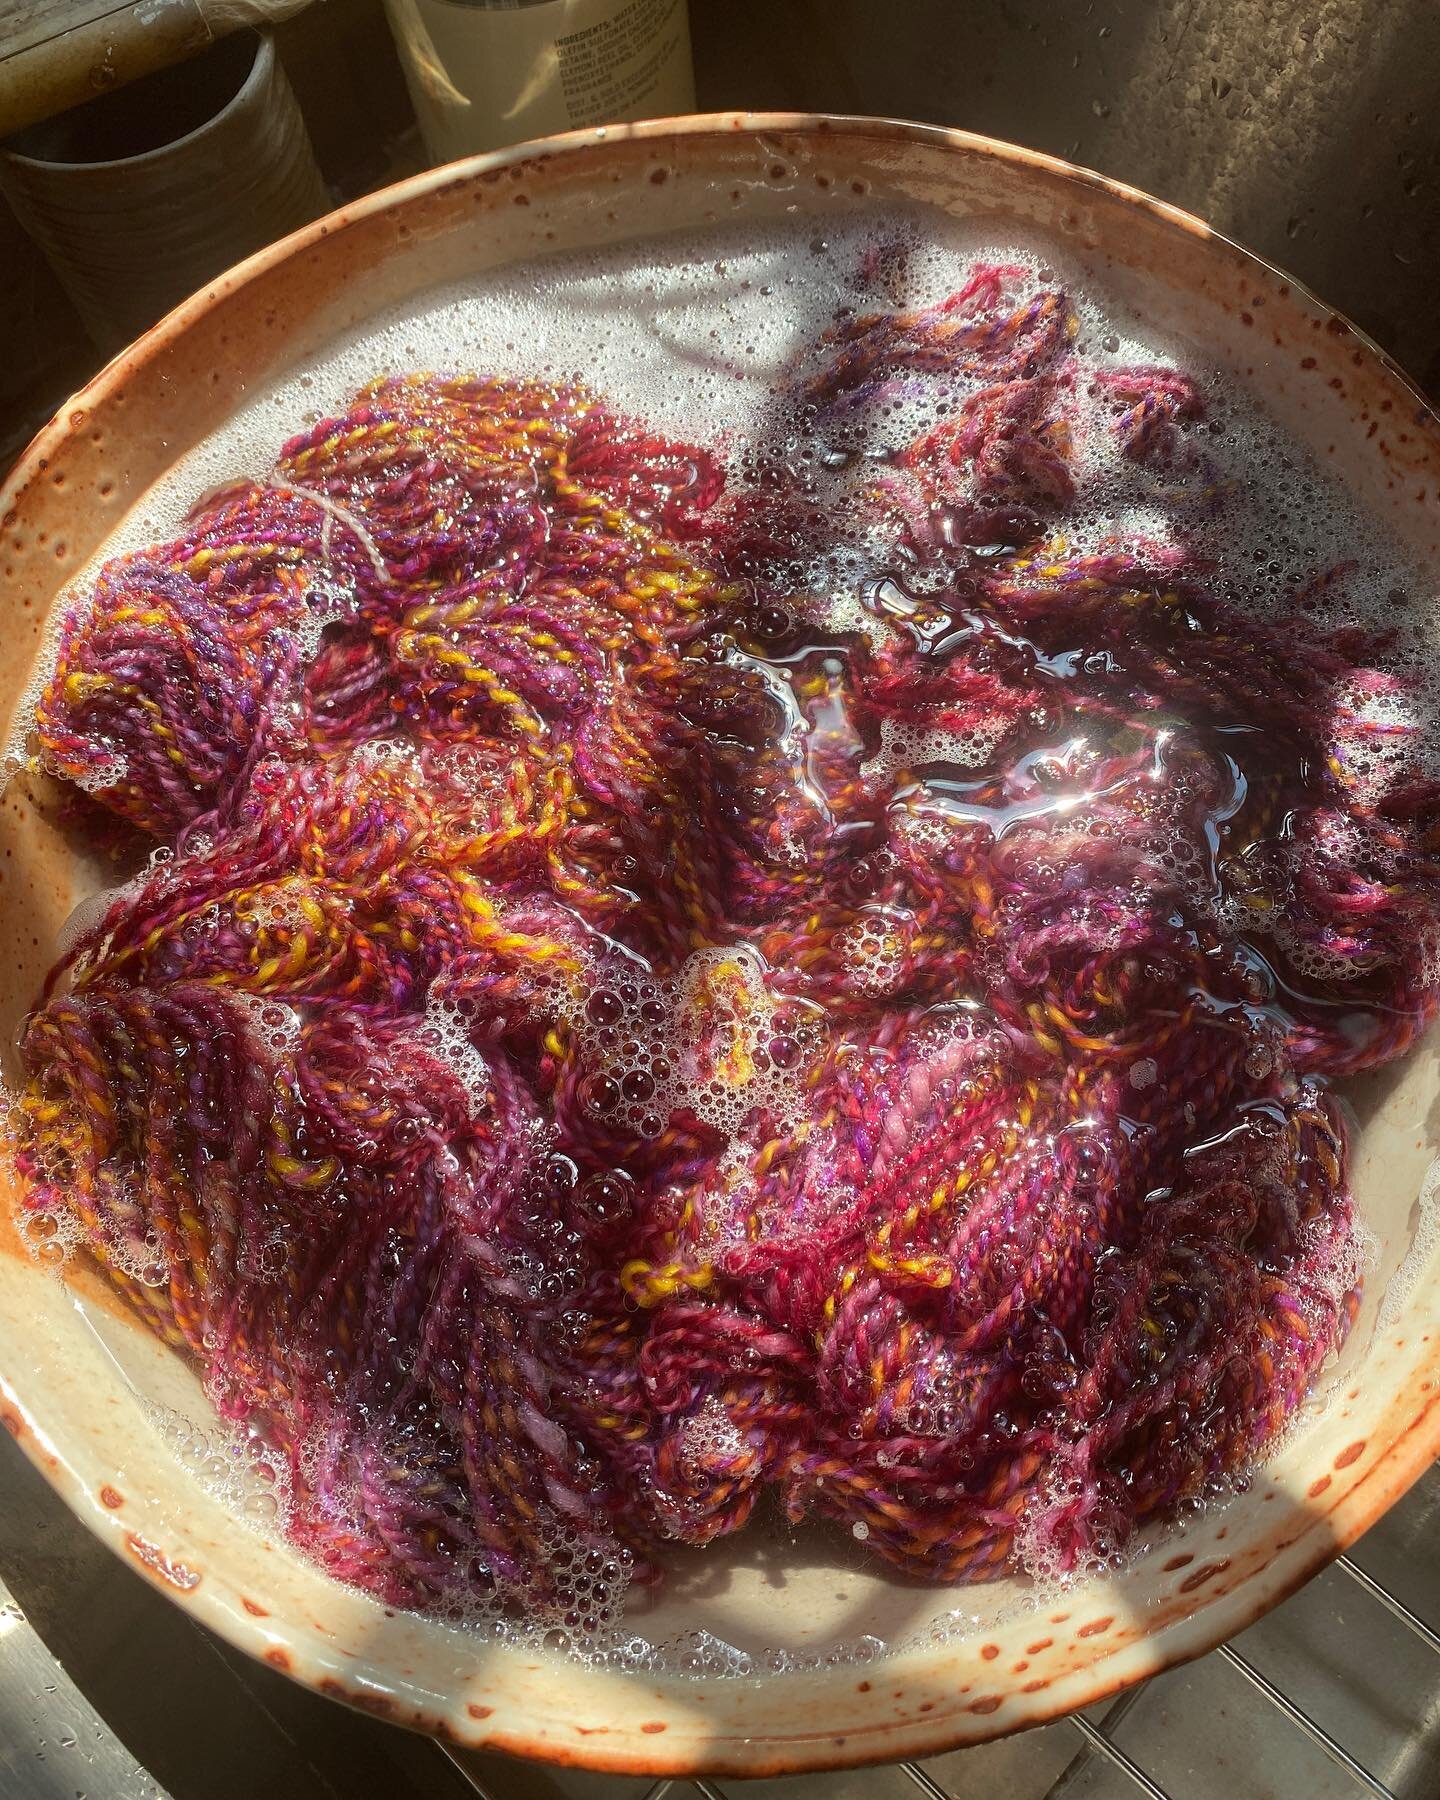 Yarn bath. After plying my hand-spun yarn, I give the skein a bath in a few drops of finer wash. This &ldquo;fulls&rdquo; the yarn and draws out any residual dye in the fiber. I rinse with lukewarm water and gently squeeze before hanging to dry. 
#ya